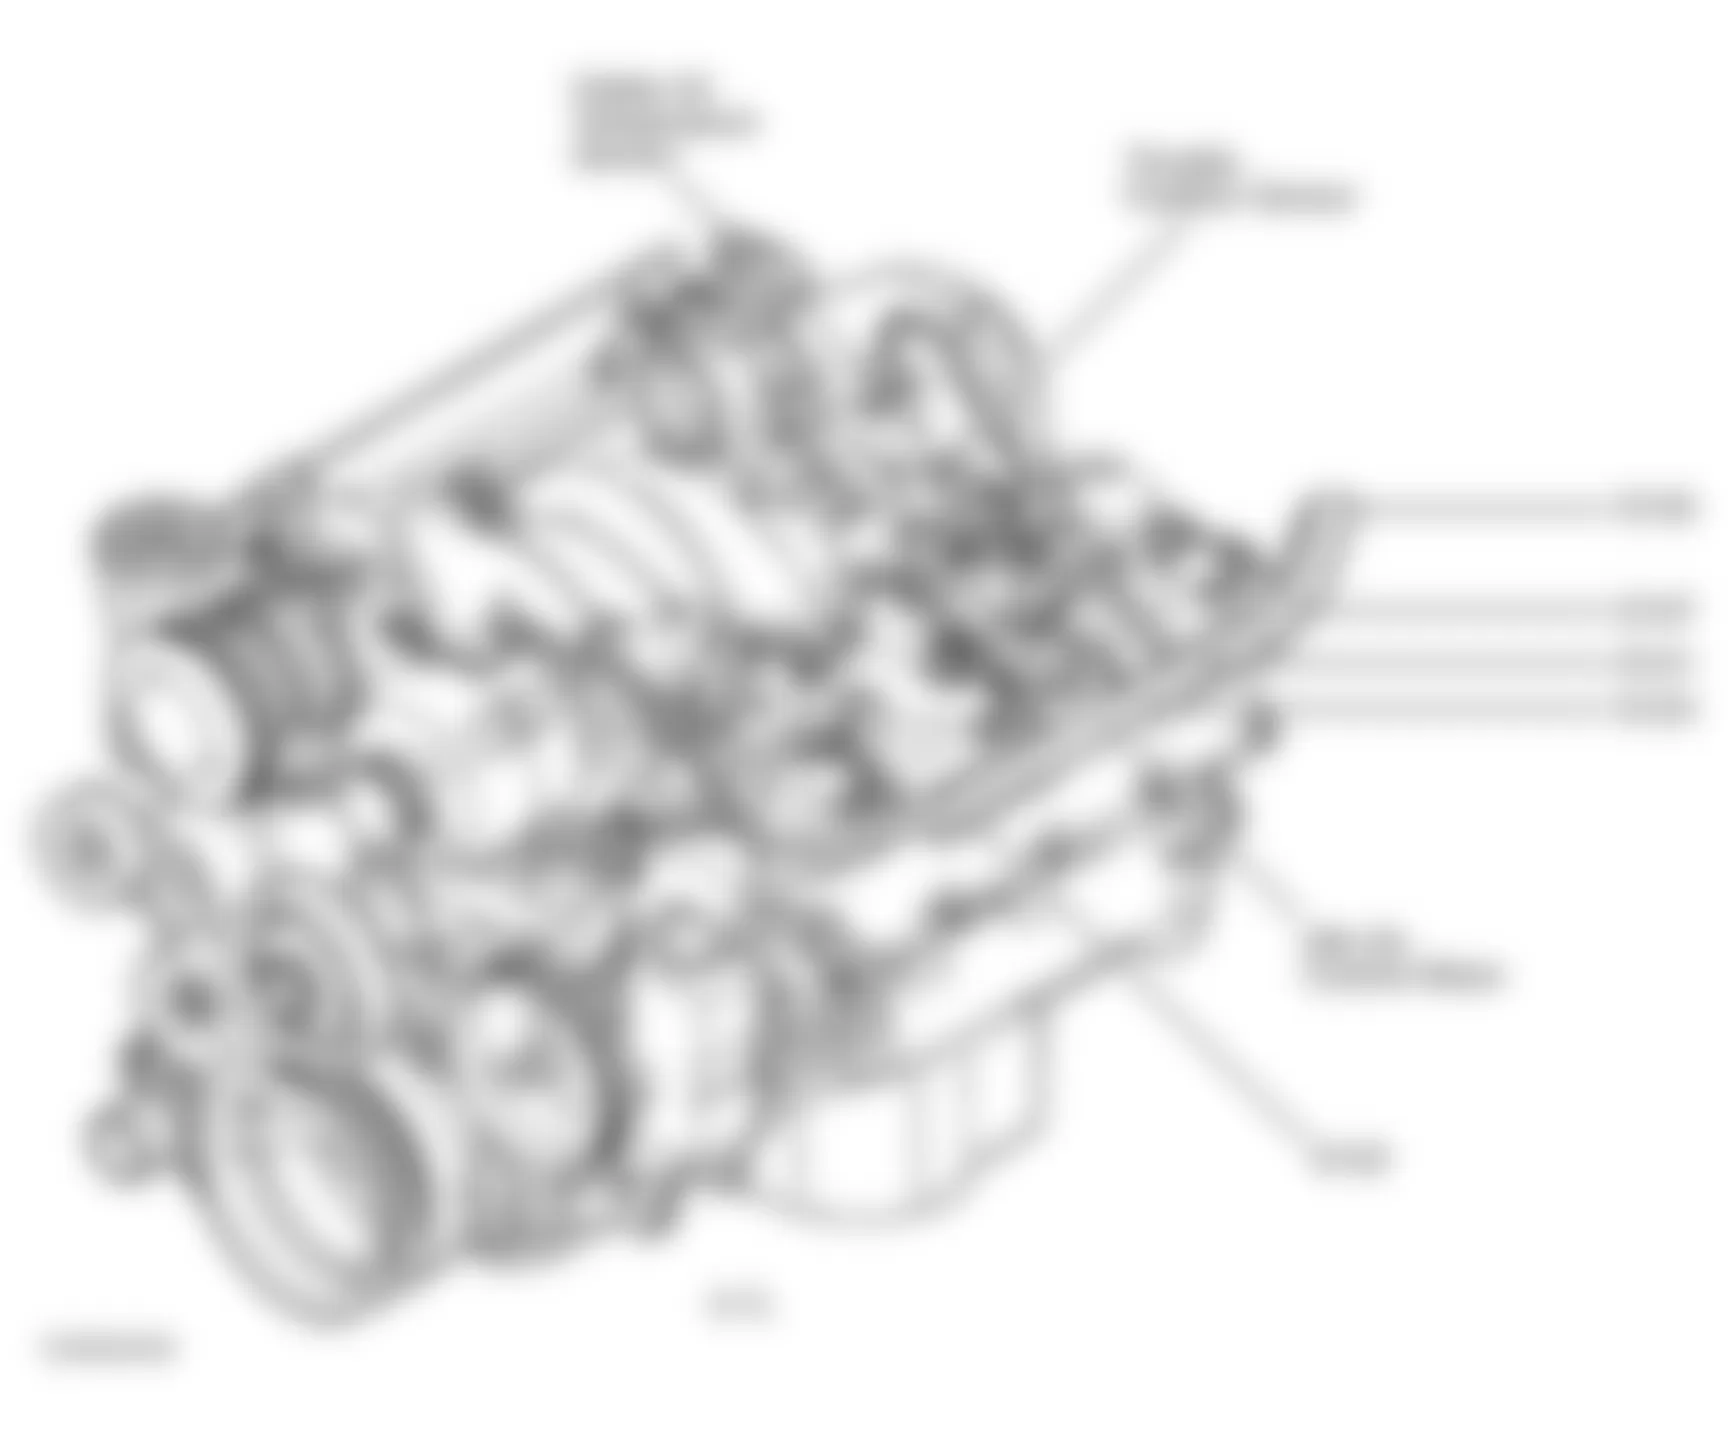 Jeep Grand Cherokee Laredo 2003 - Component Locations -  Top Left Side Of Engine (4.7L)